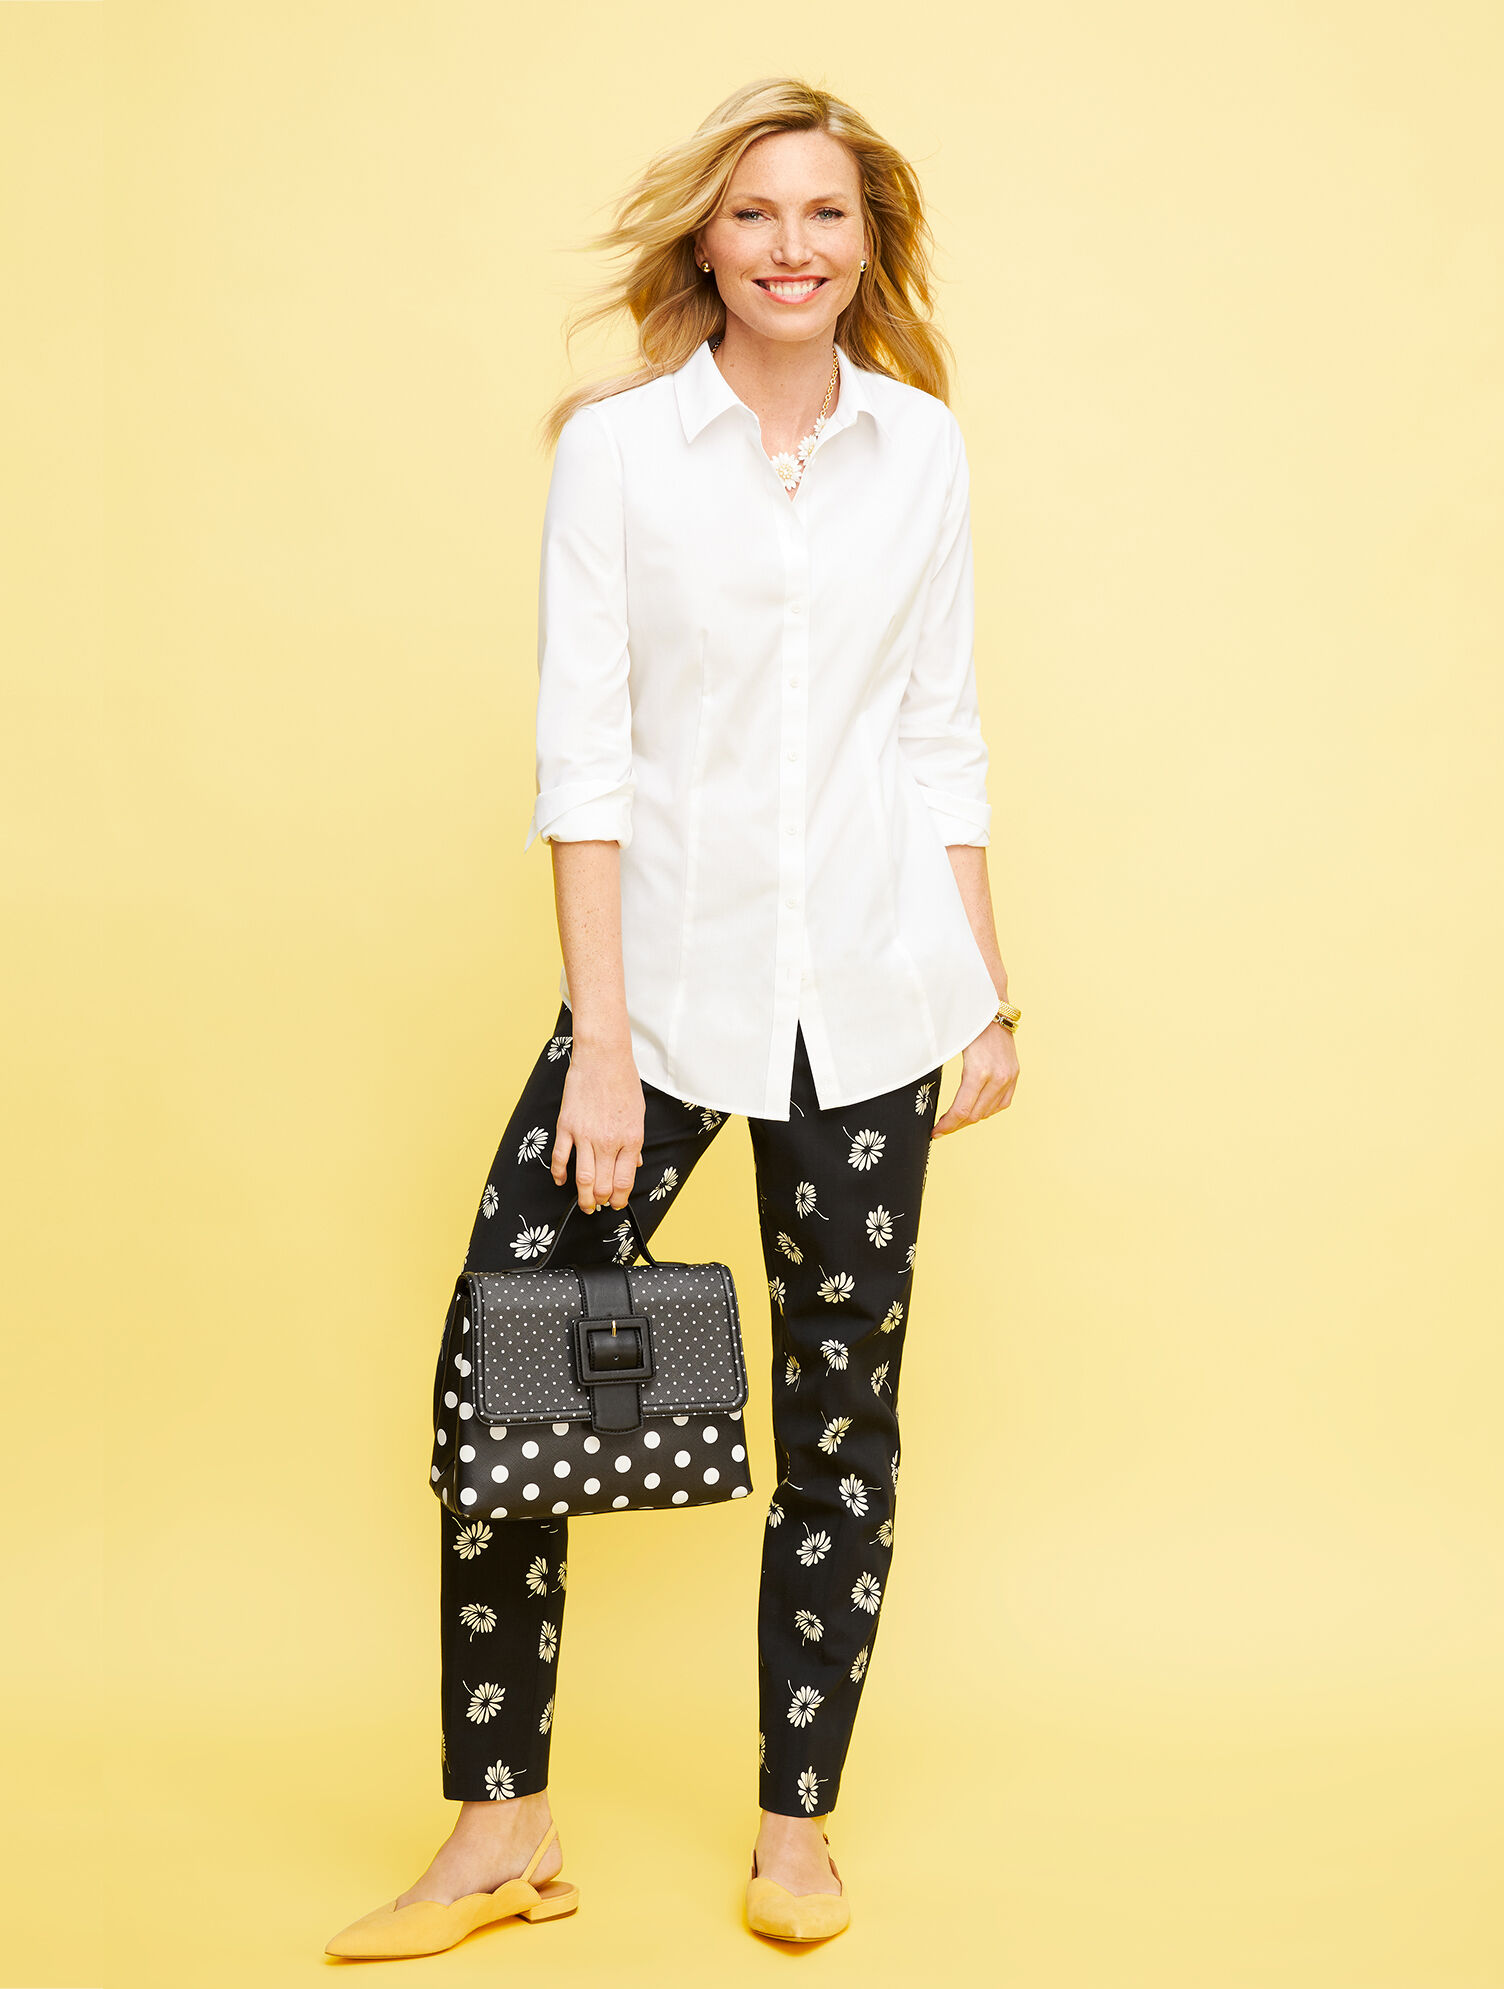 Talbots Hampshire Ankle Pants - Sequin Tweed